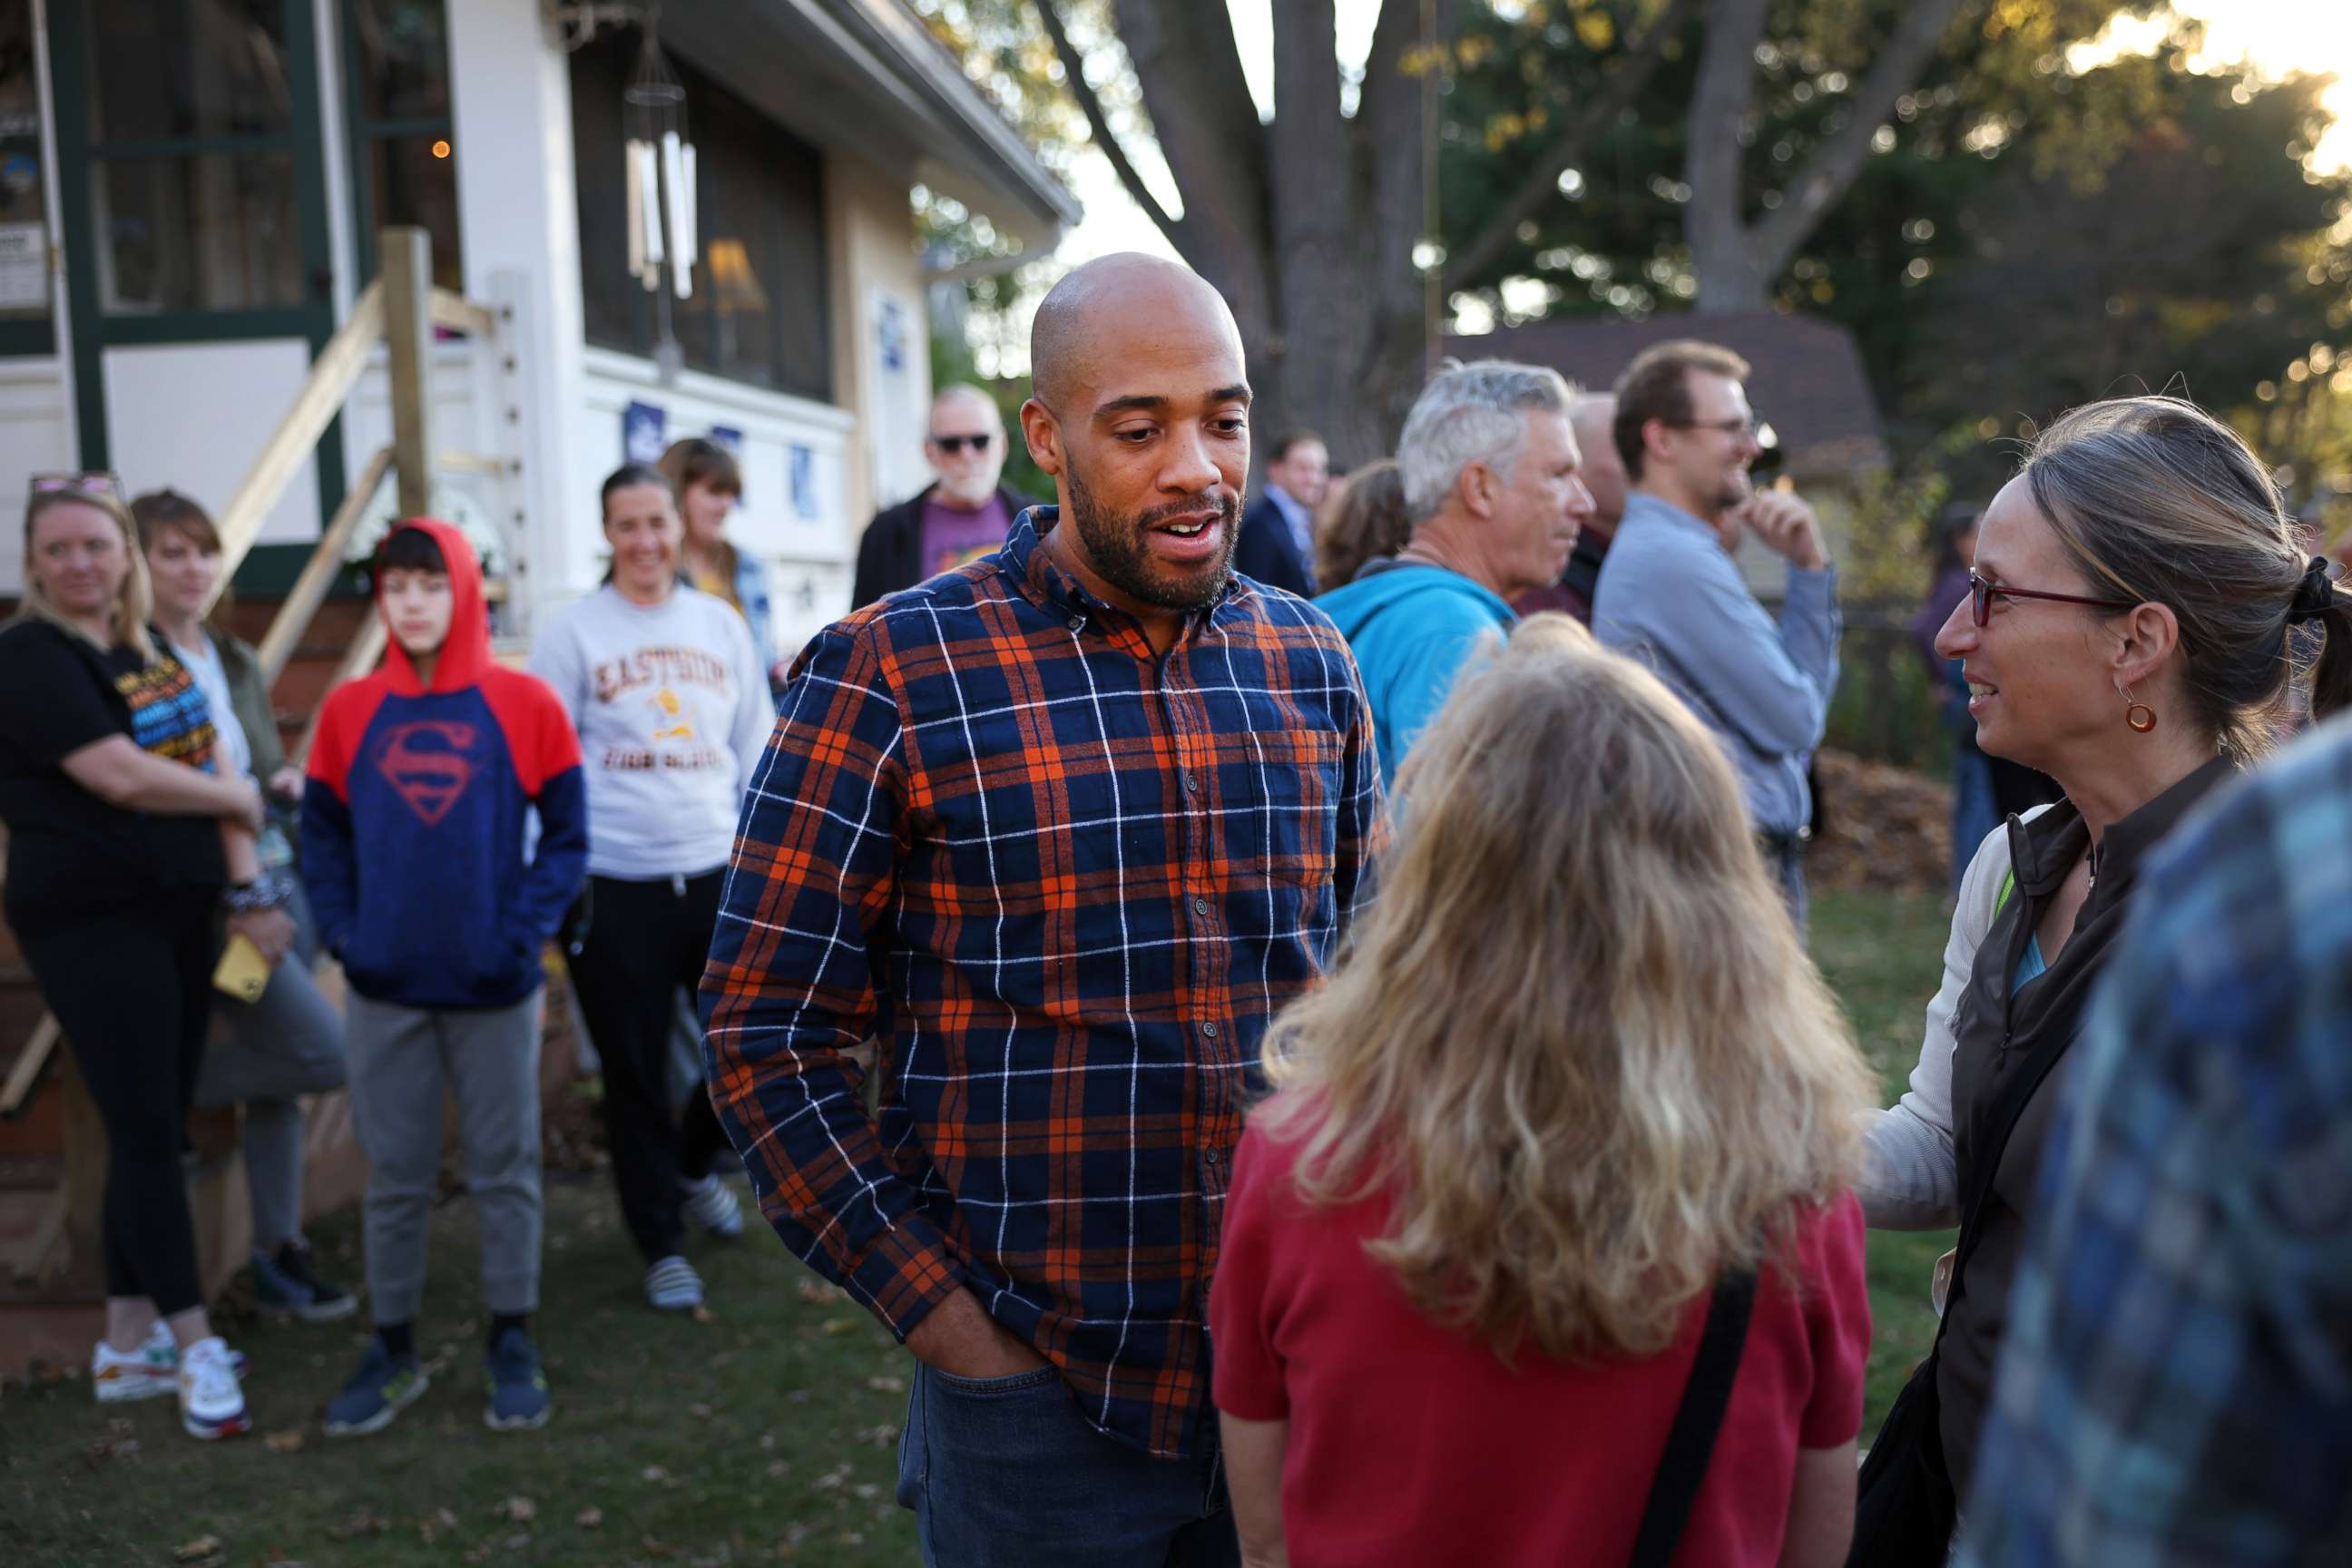 PHOTO: Democratic Senate candidate, Wisconsin Lt. Gov. Mandela Barnes greets supporters at a campaign rally, Nov. 2, 2022 in Madison, Wisconsin.